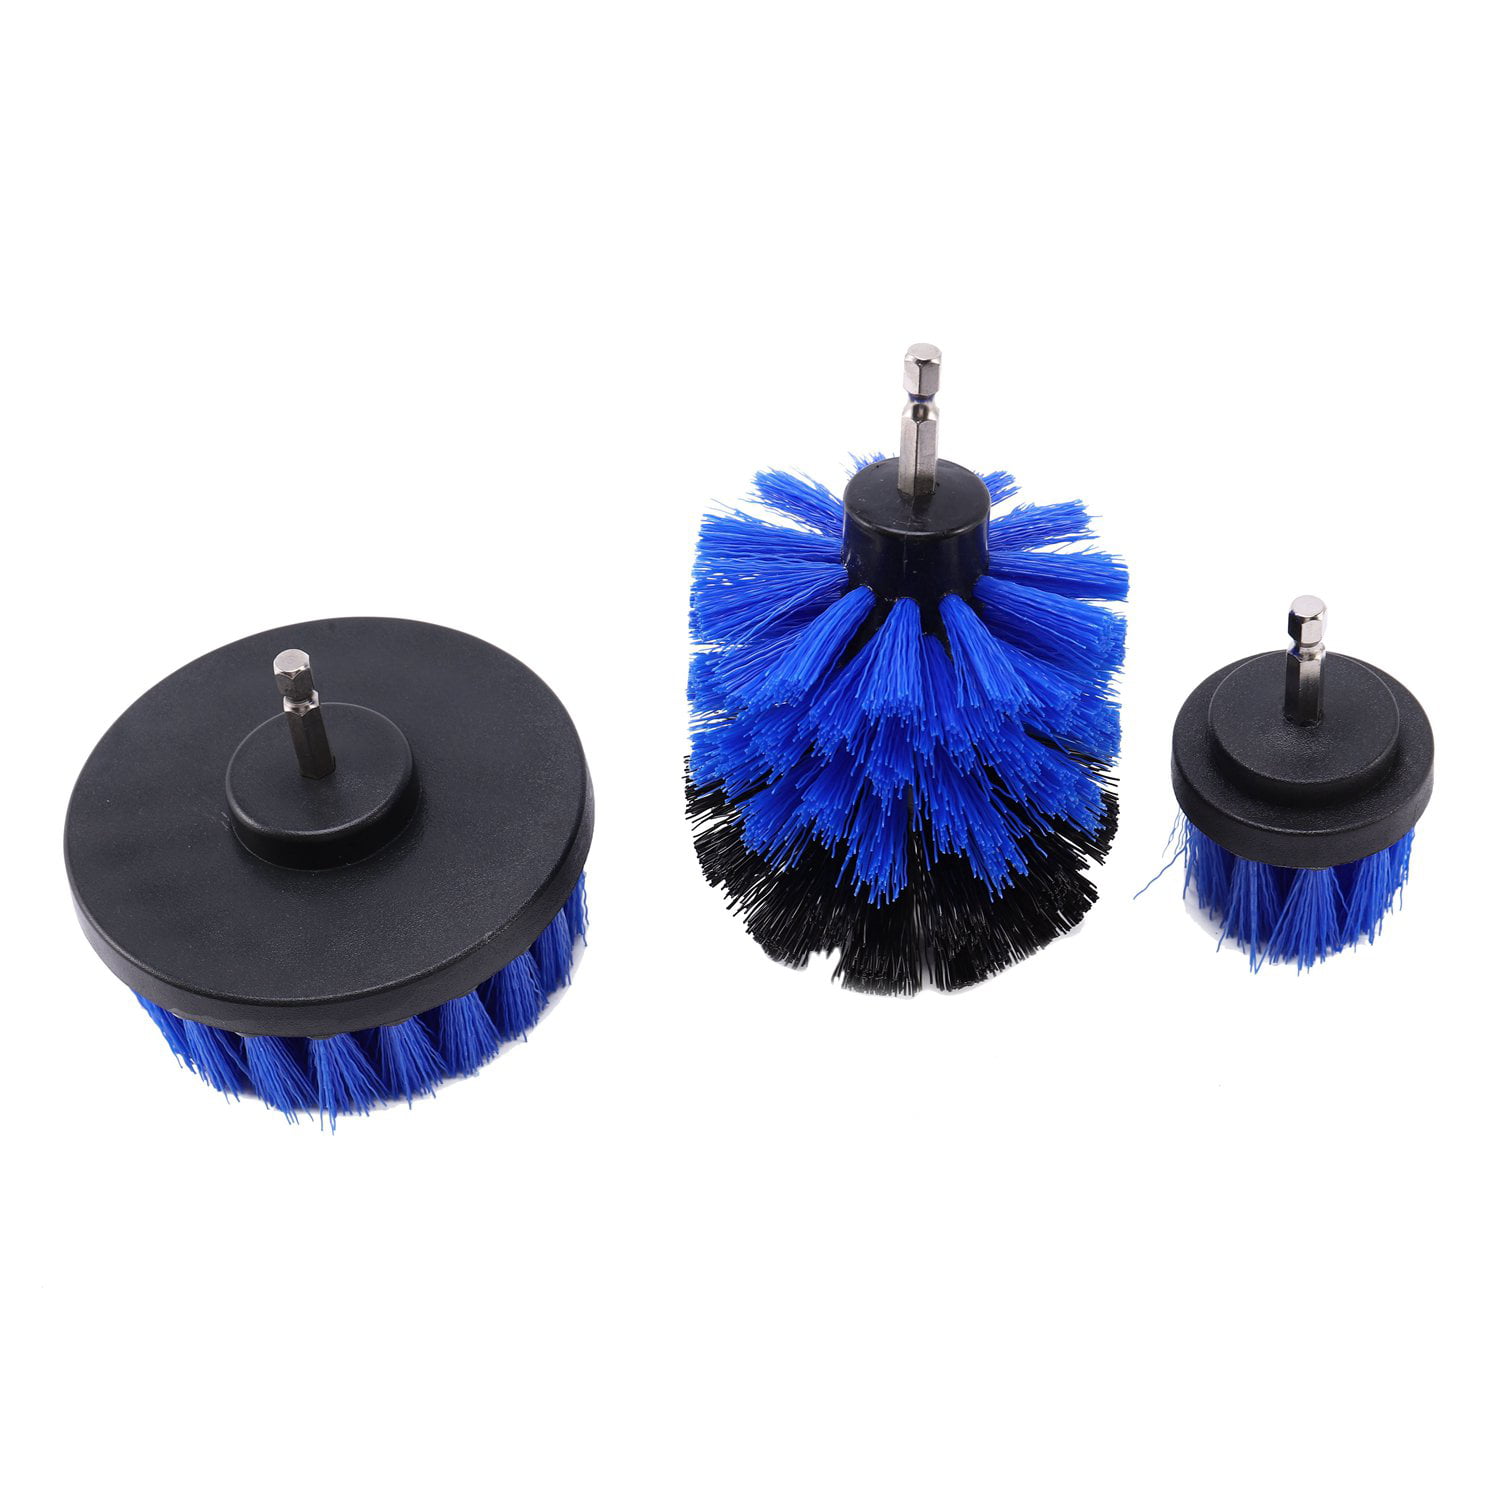 3 pcs Tile Grout Power Rotary Purifier Drill Bathtub Cleaner Cleaning Brush 